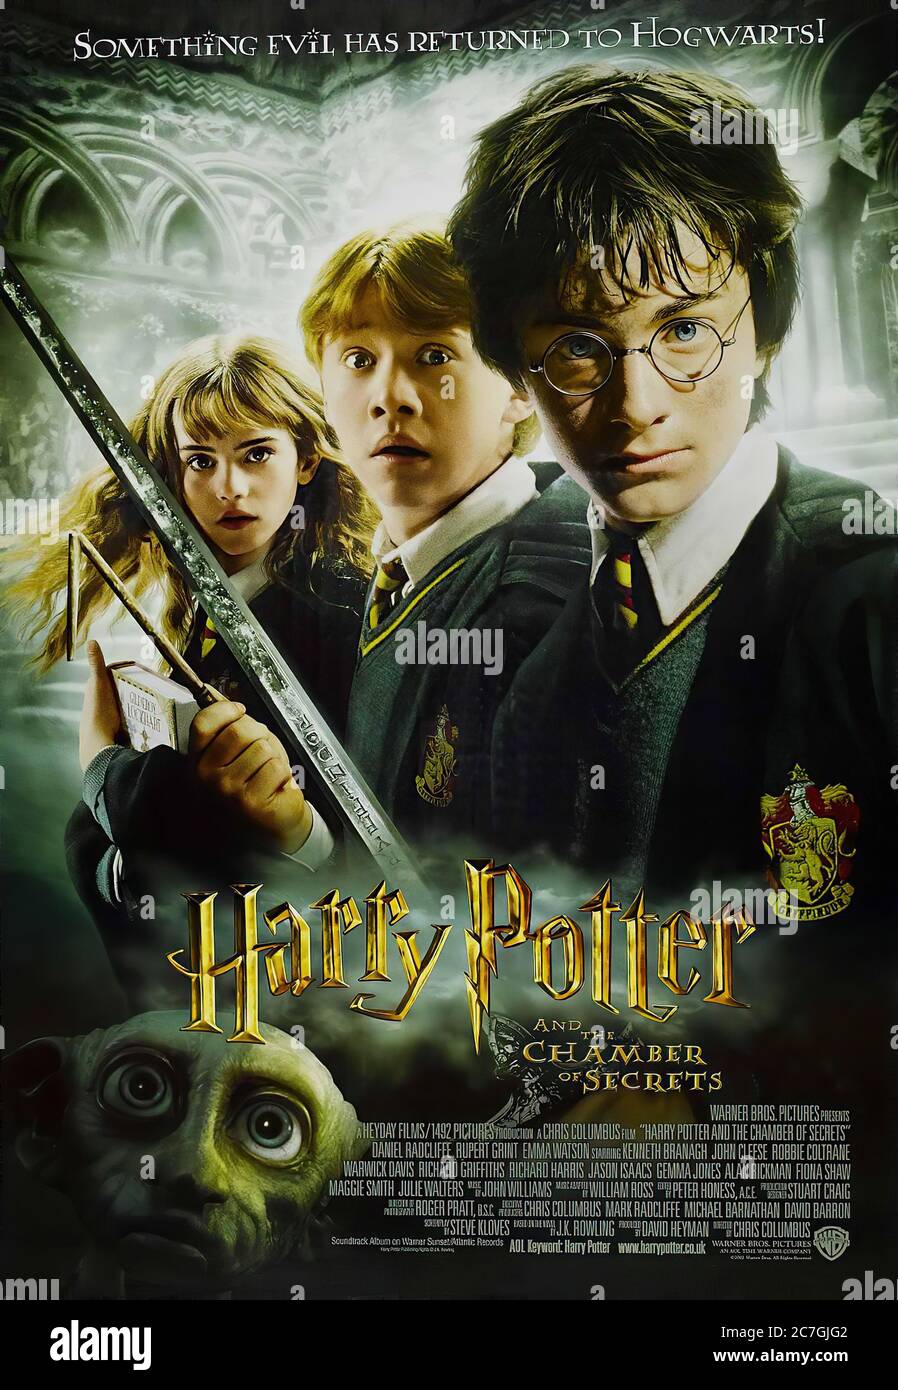 Harry Potter and the Chamber of Secrets - Movie Poster Stock Photo